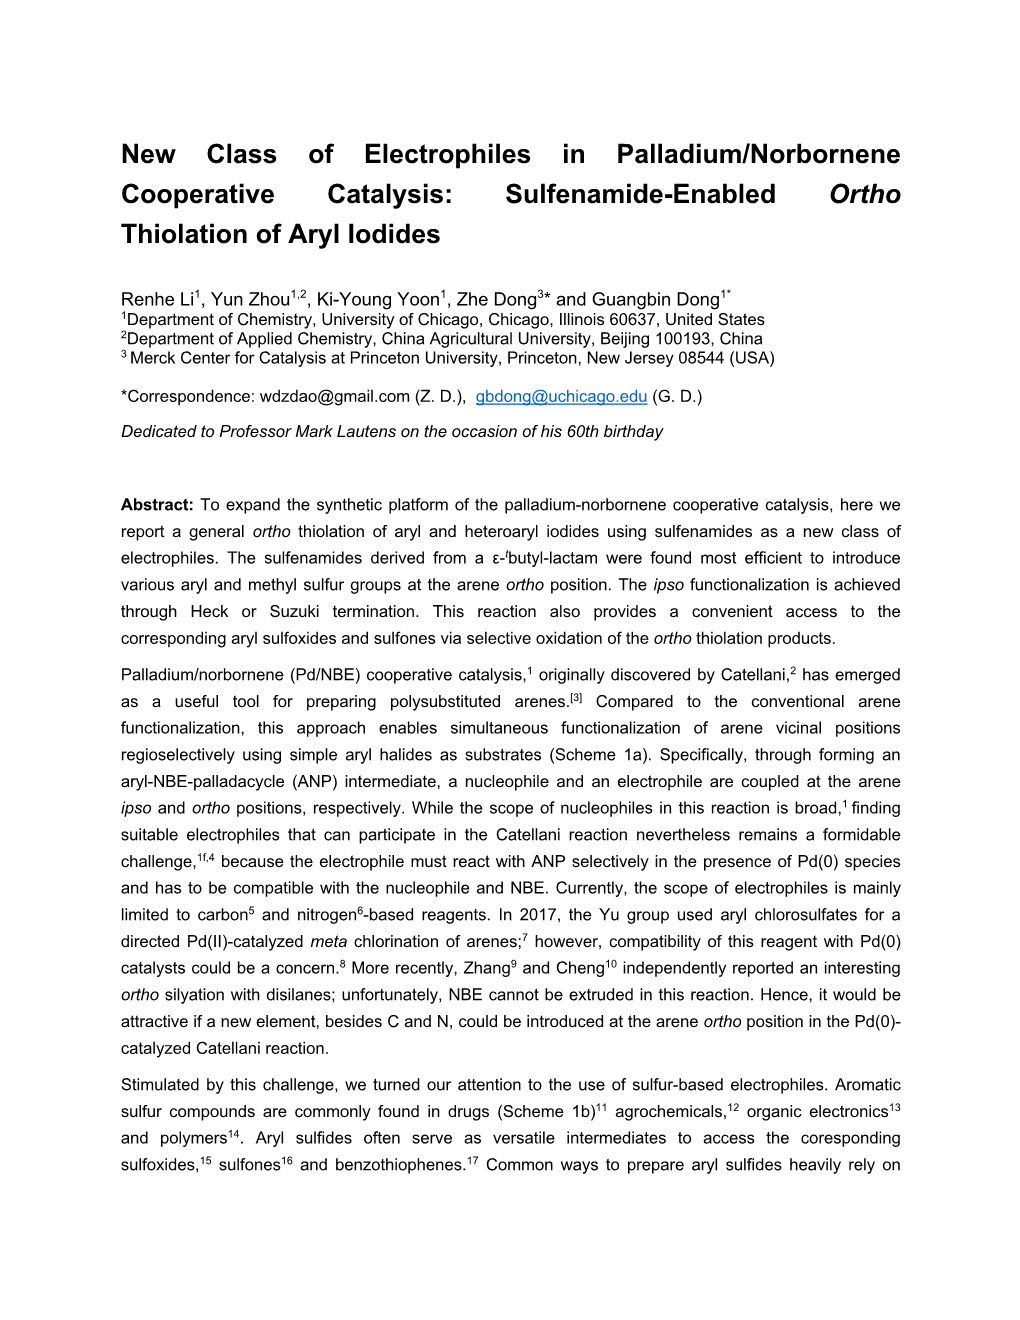 New Class of Electrophiles in Palladium/Norbornene Cooperative Catalysis: Sulfenamide-Enabled Ortho Thiolation of Aryl Iodides